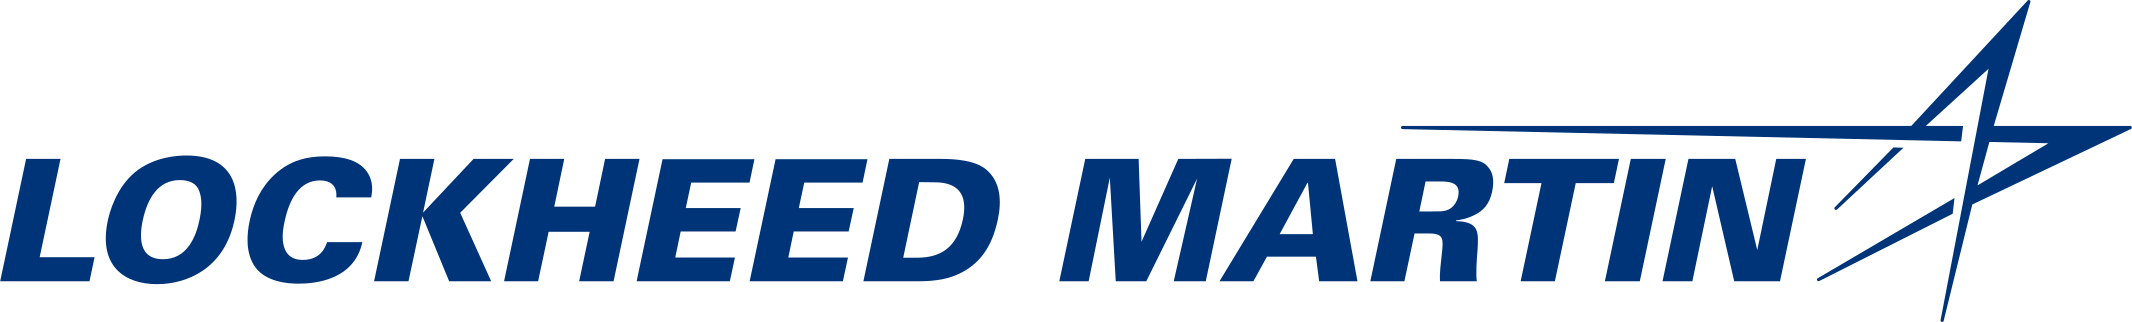 Lockheed Martin (LMT) increases dividend by 5%, its 21st consecutive annual increase